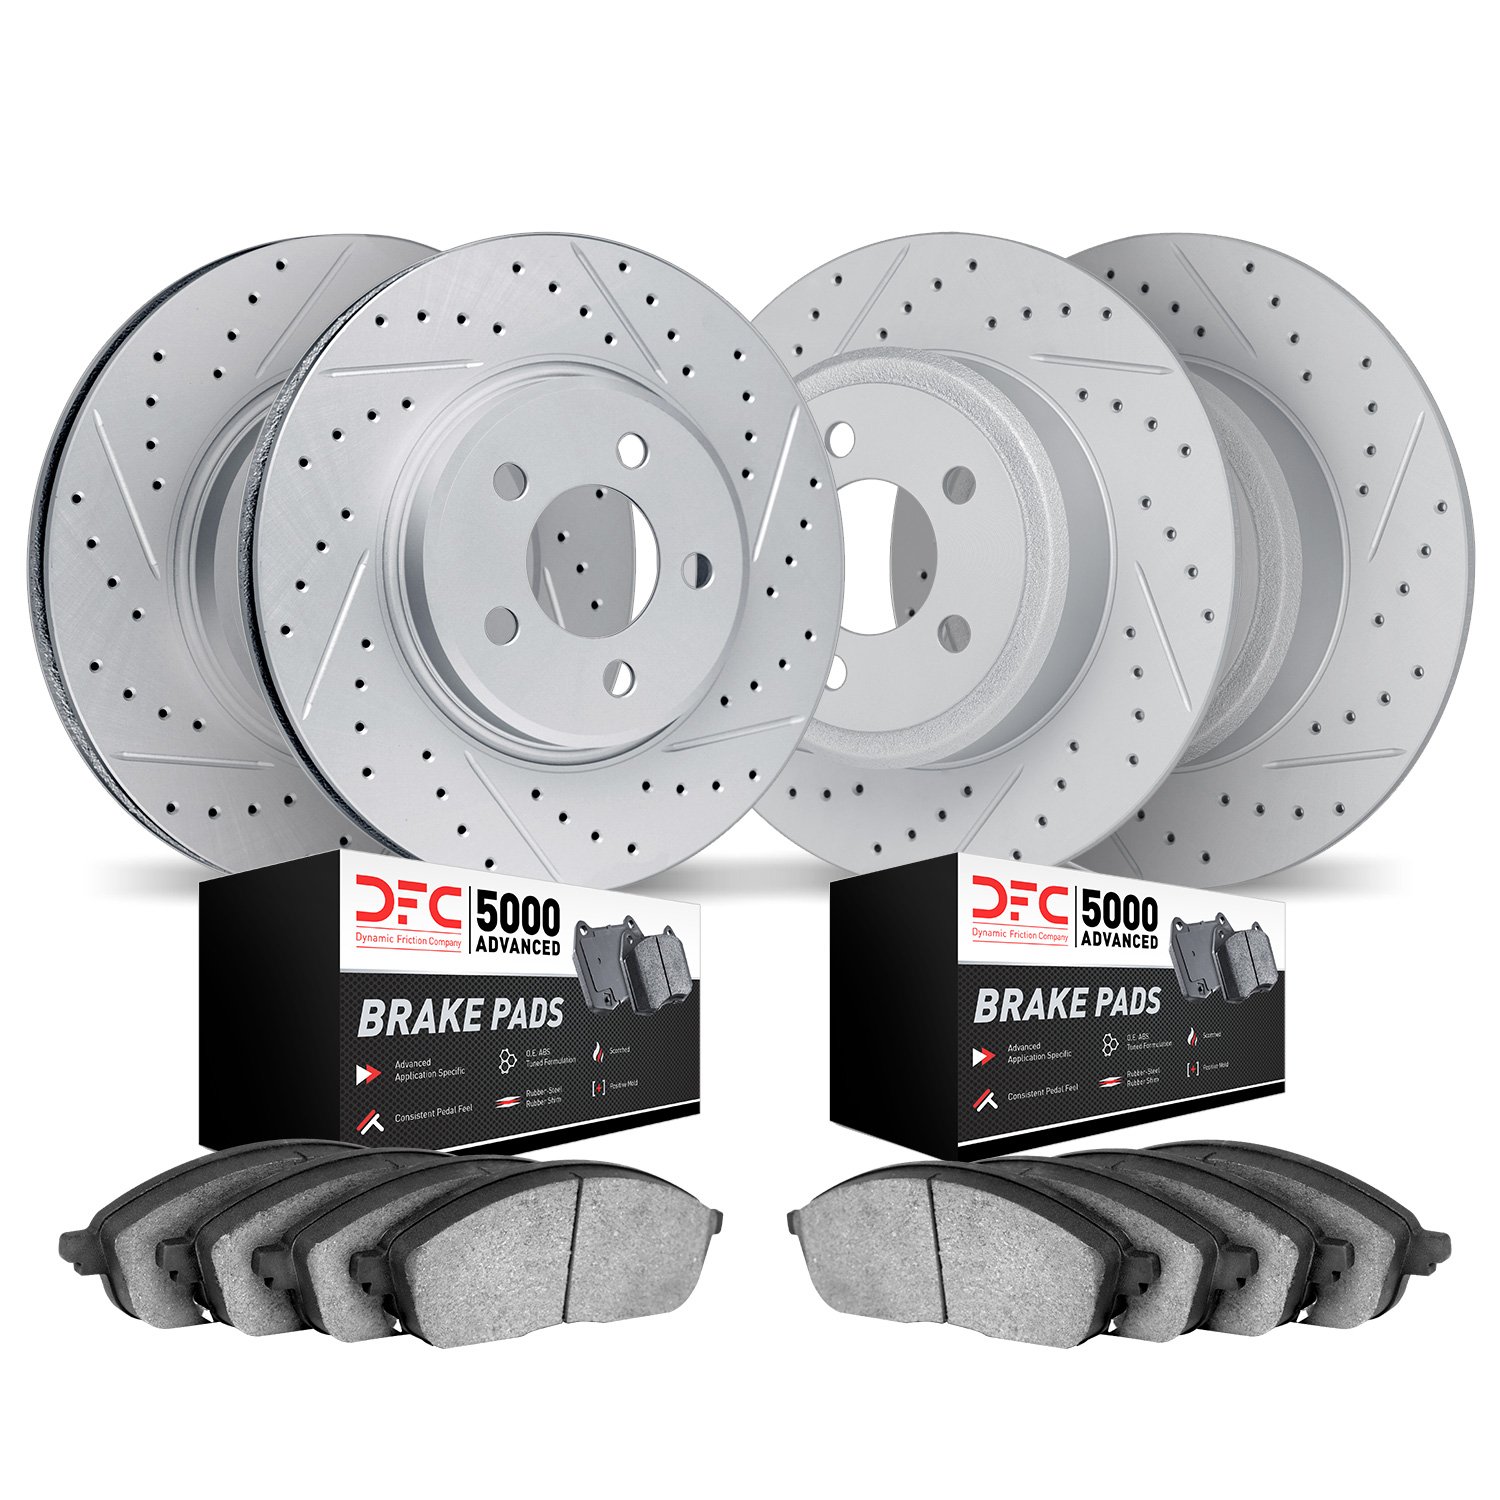 2504-31001 Geoperformance Drilled/Slotted Rotors w/5000 Advanced Brake Pads Kit, 1995-2001 BMW, Position: Front and Rear